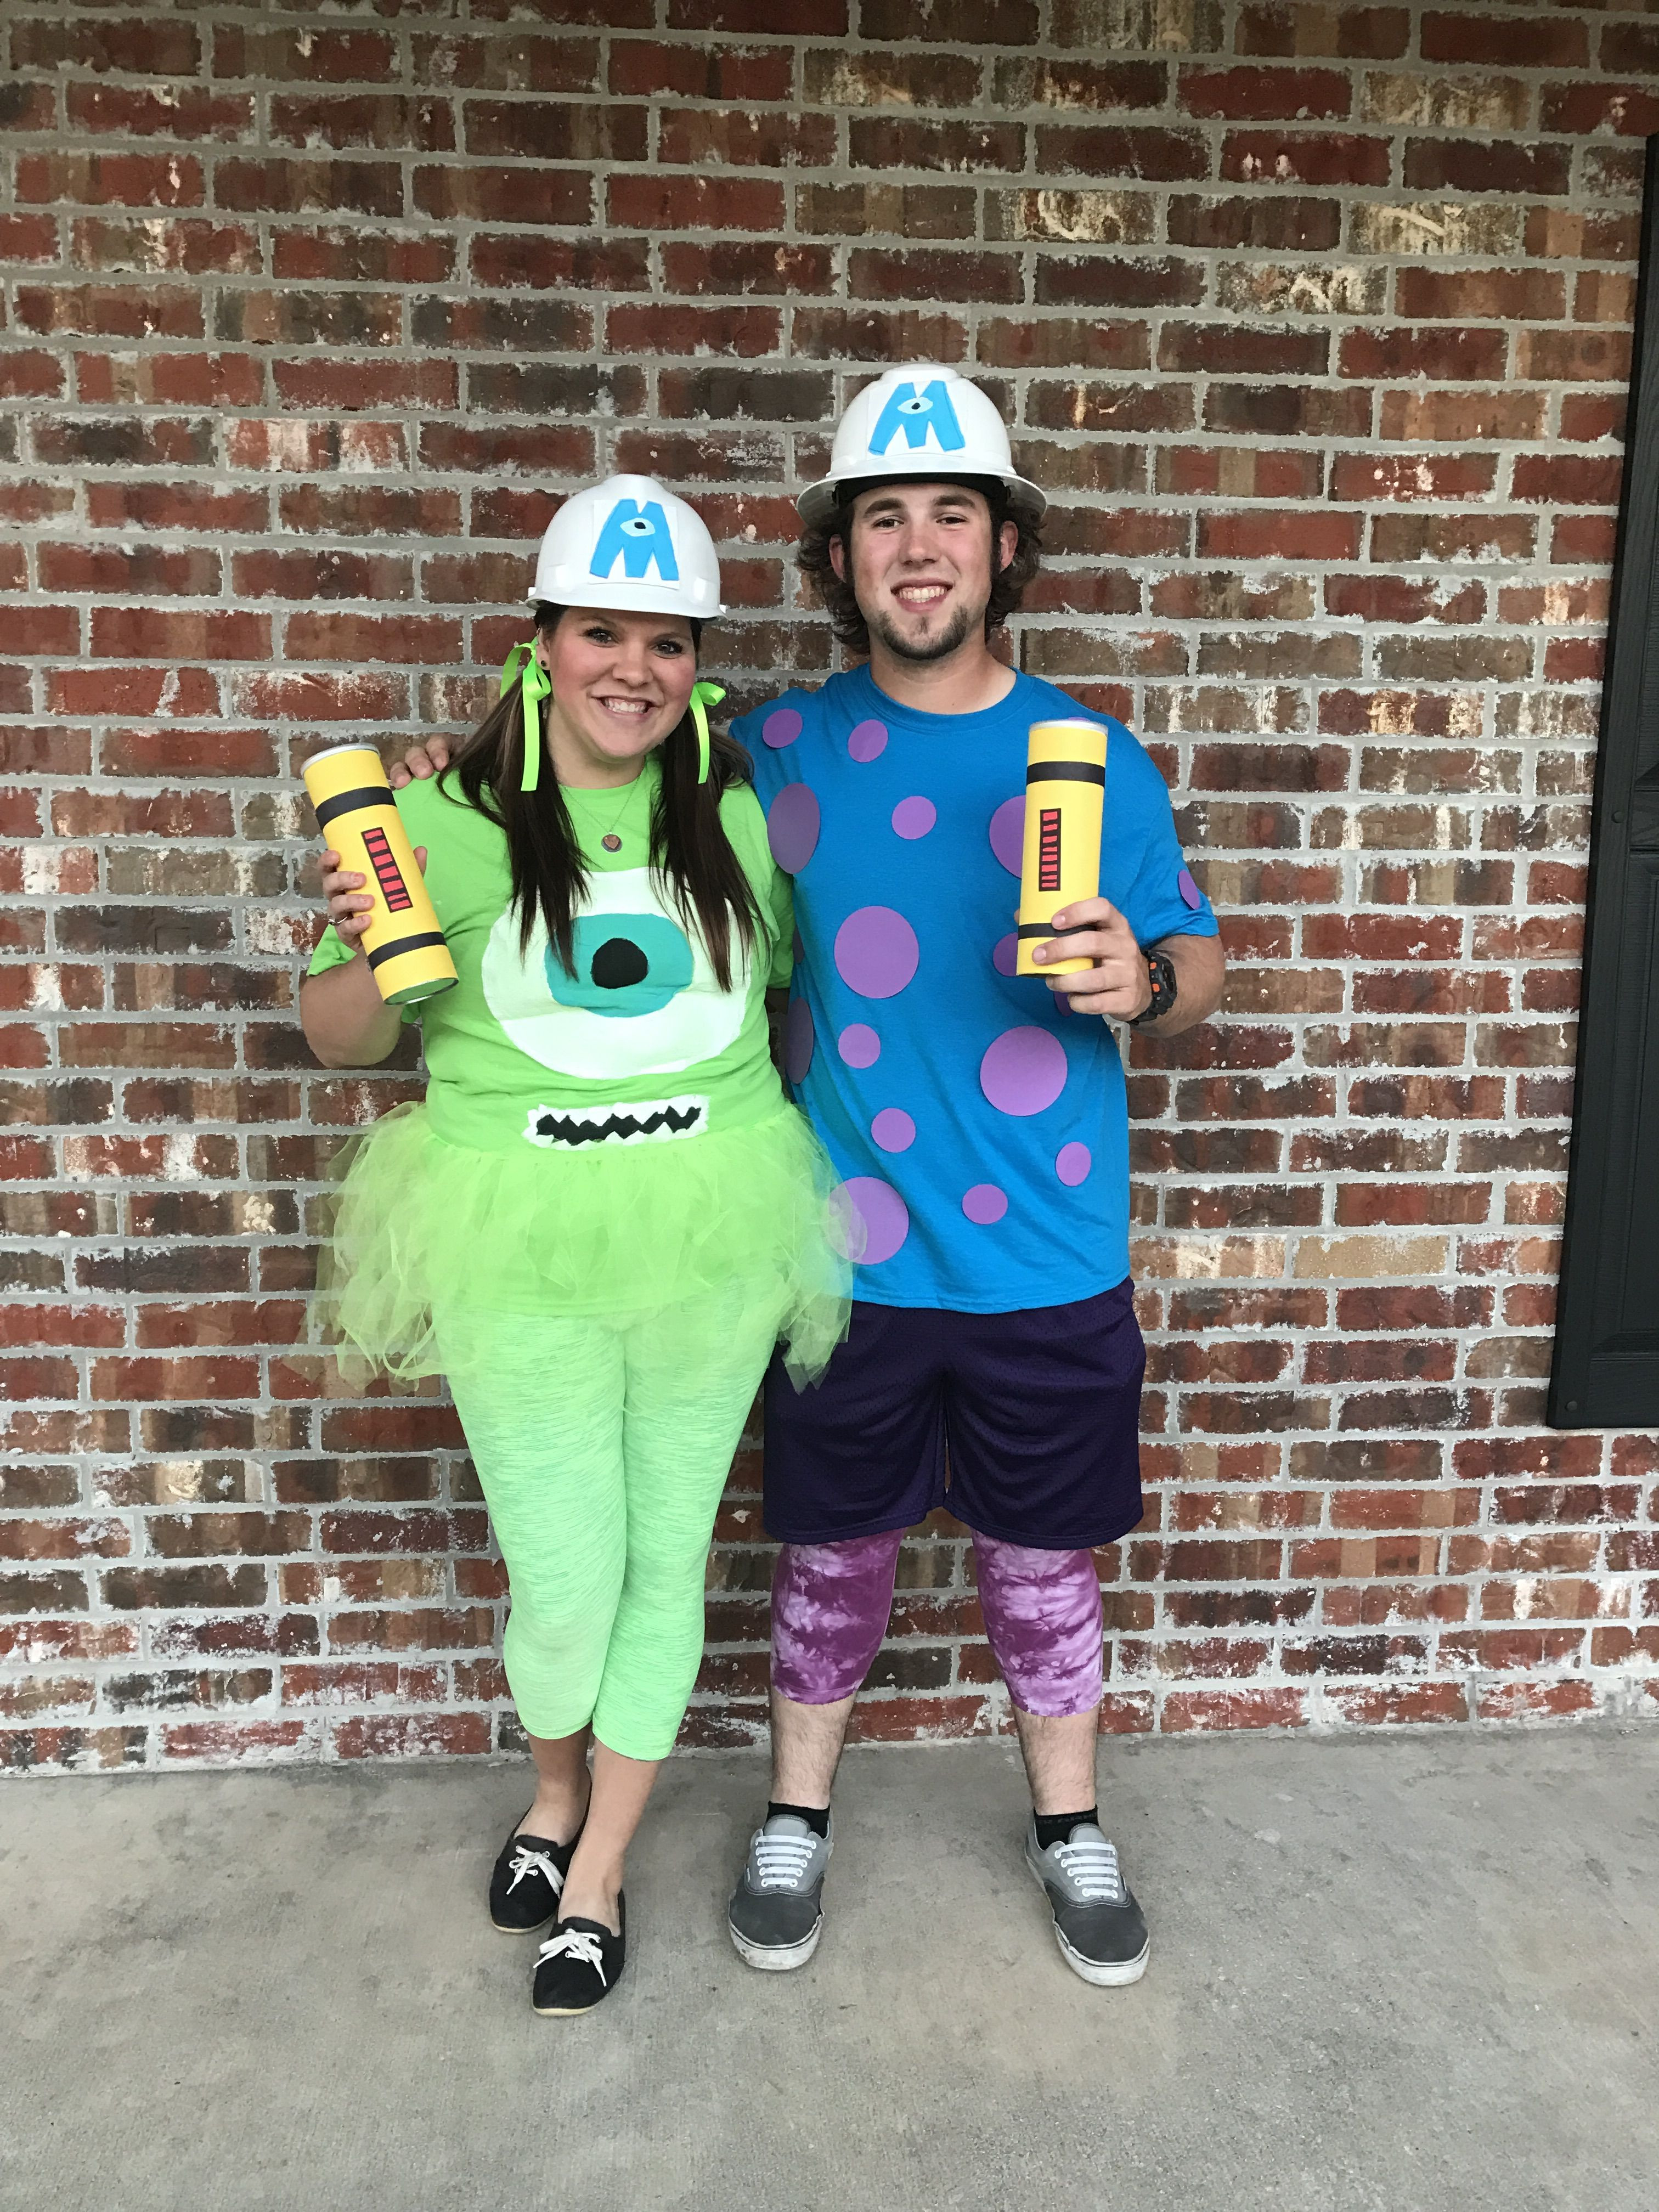 Sully Monsters Inc Costume DIY
 Mike and Sully Halloween costume diy monsters inc